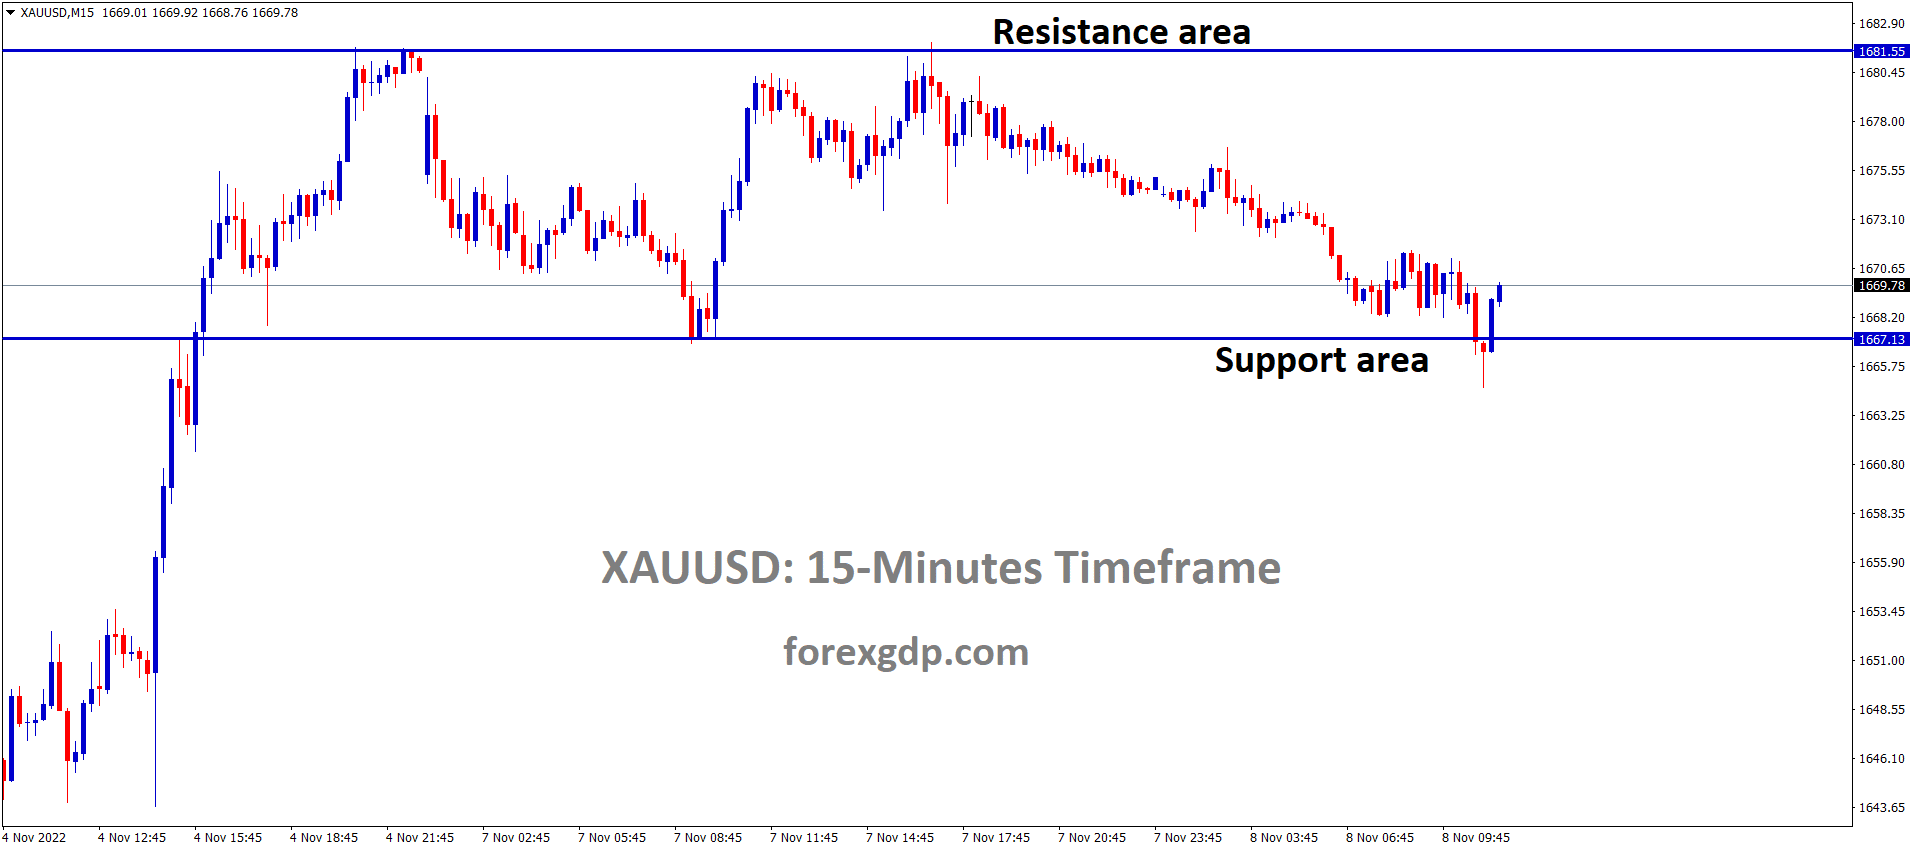 XAUUSD Gold price is moving in the Box Pattern and the market has rebounded from the horiozontal support area of the pattern